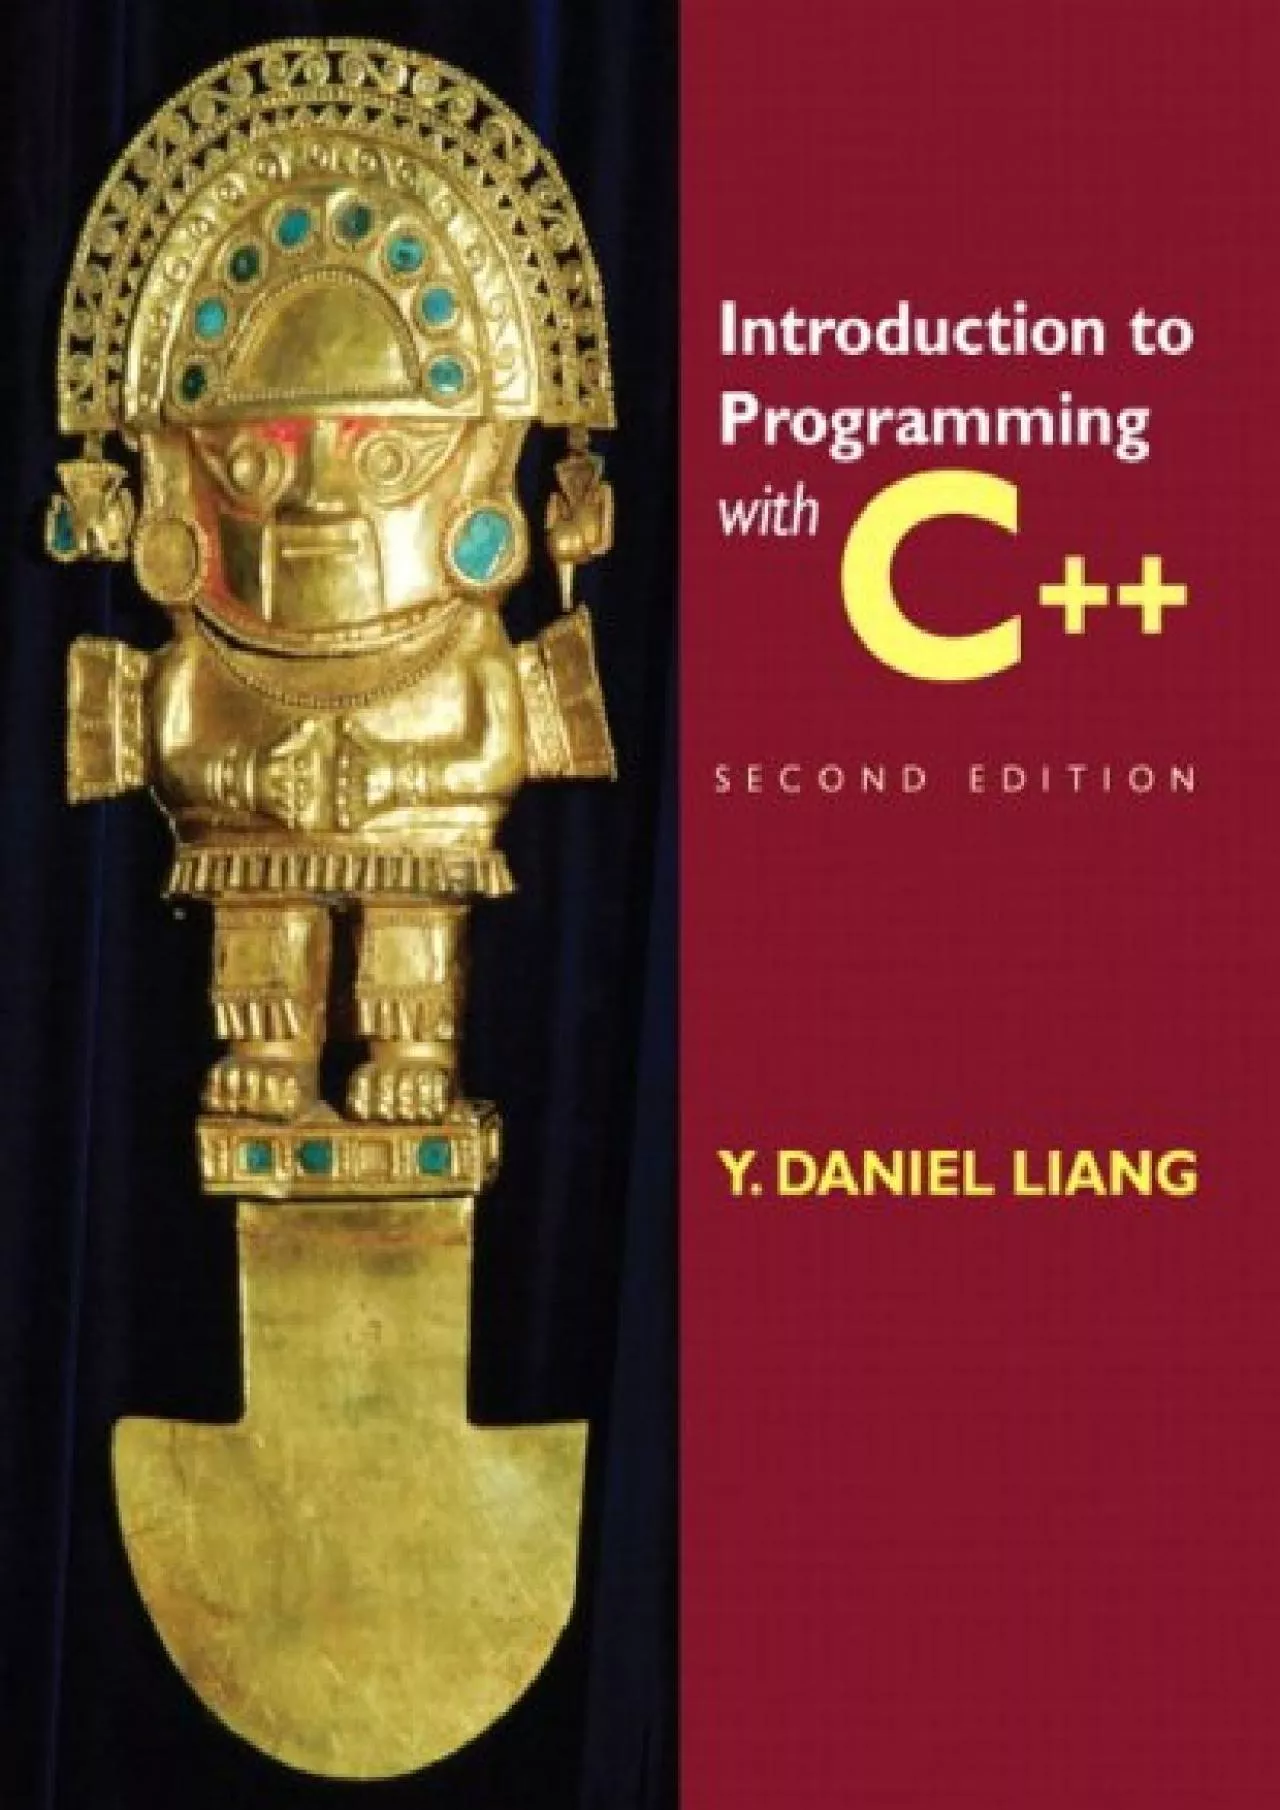 [DOWLOAD]-Introduction to Programming with C++ (2nd Edition)